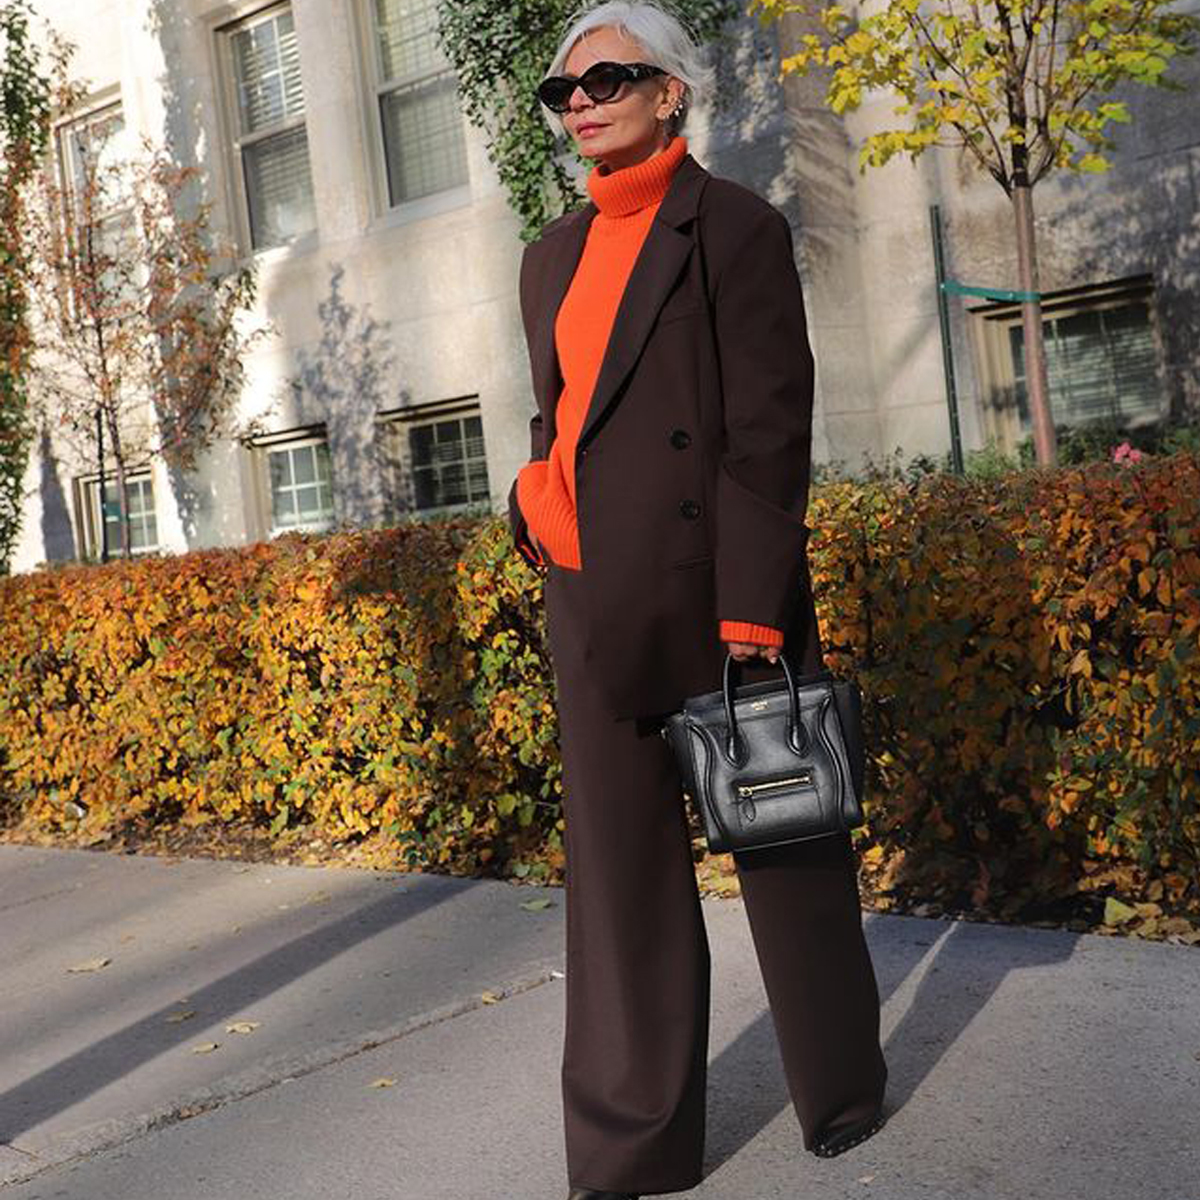 9 Autumn Work Outfit Ideas People Will Compliment You On